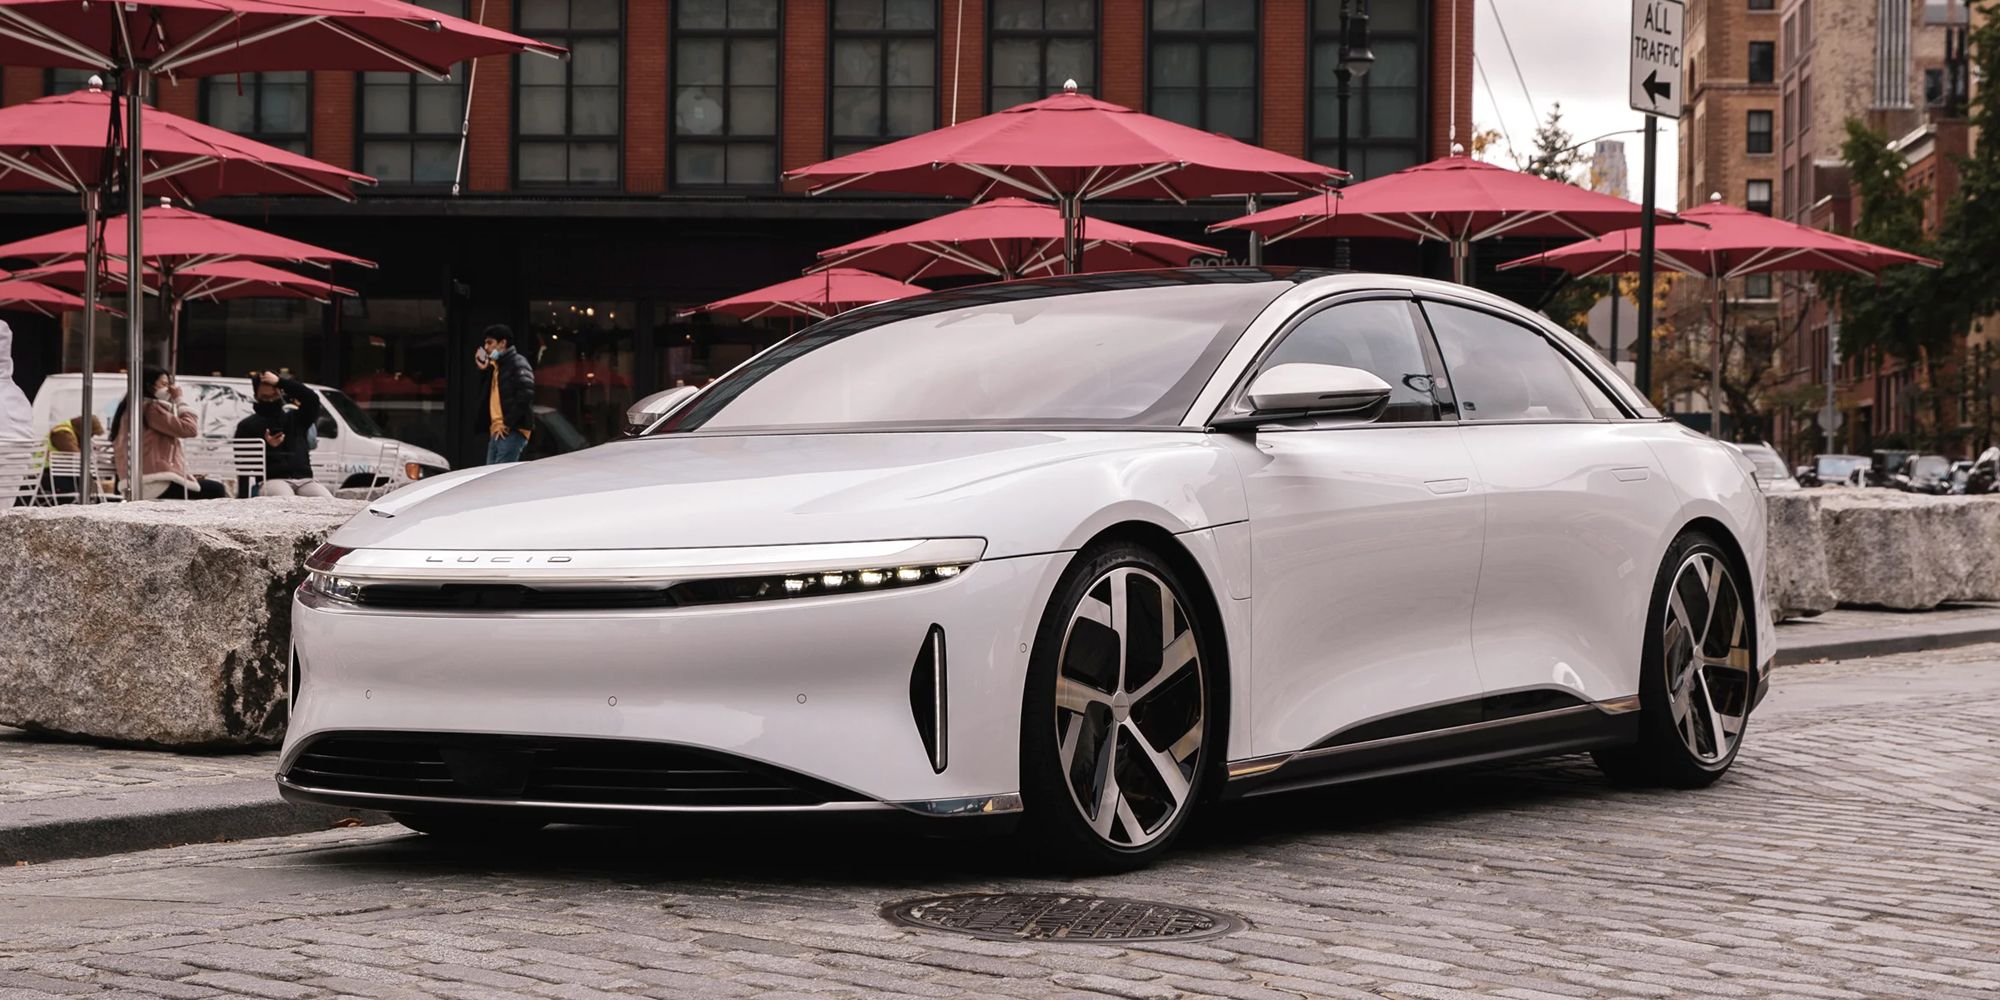 The front of the Lucid Air